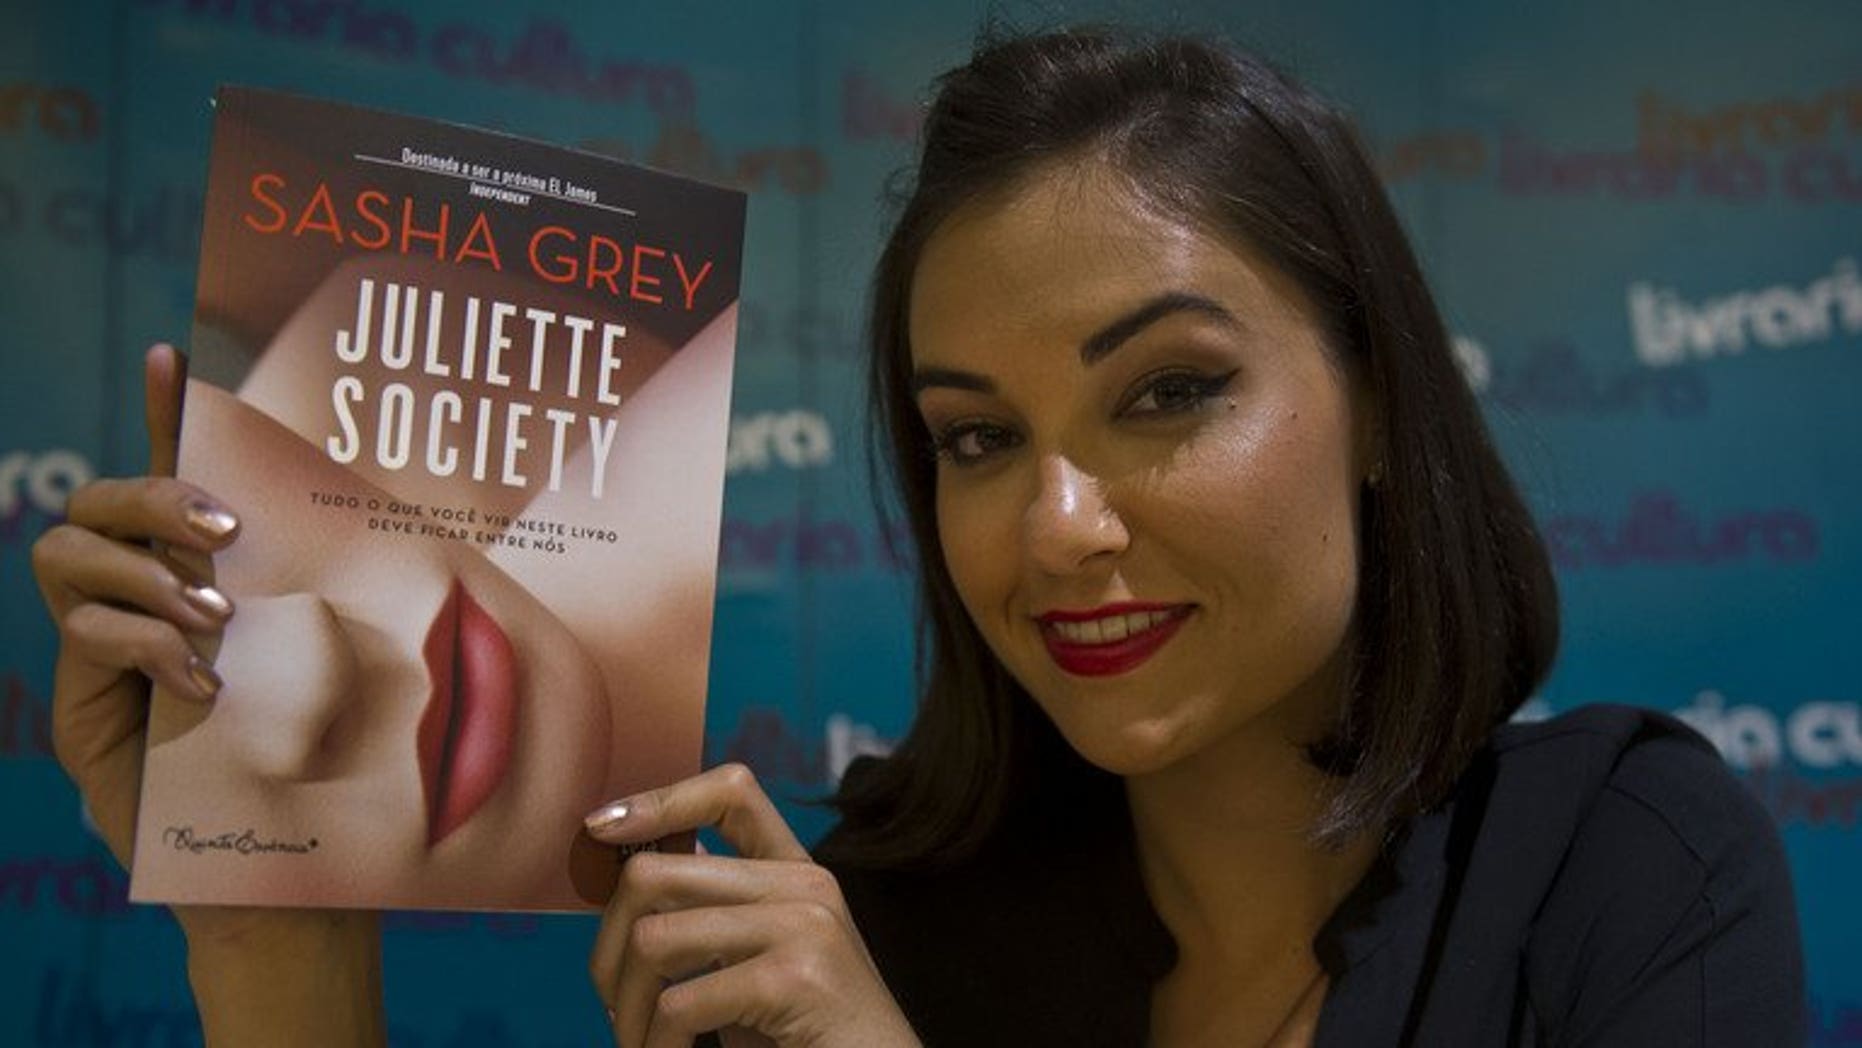 Ex - US ex-porn star in Brazil to promote new erotic book | Fox News